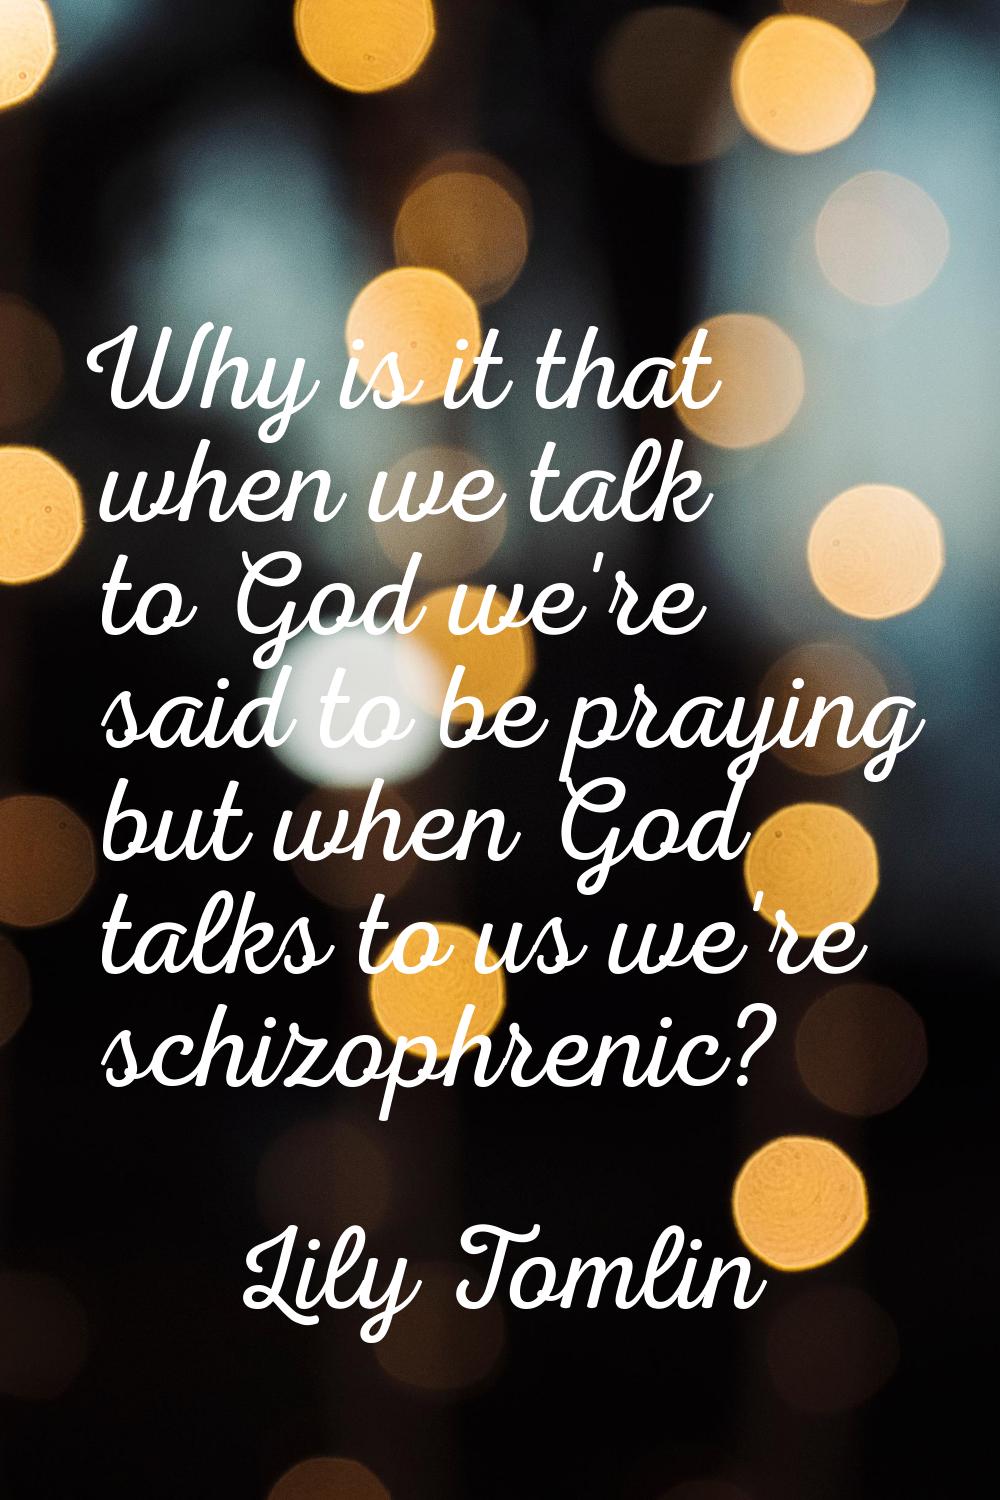 Why is it that when we talk to God we're said to be praying but when God talks to us we're schizoph